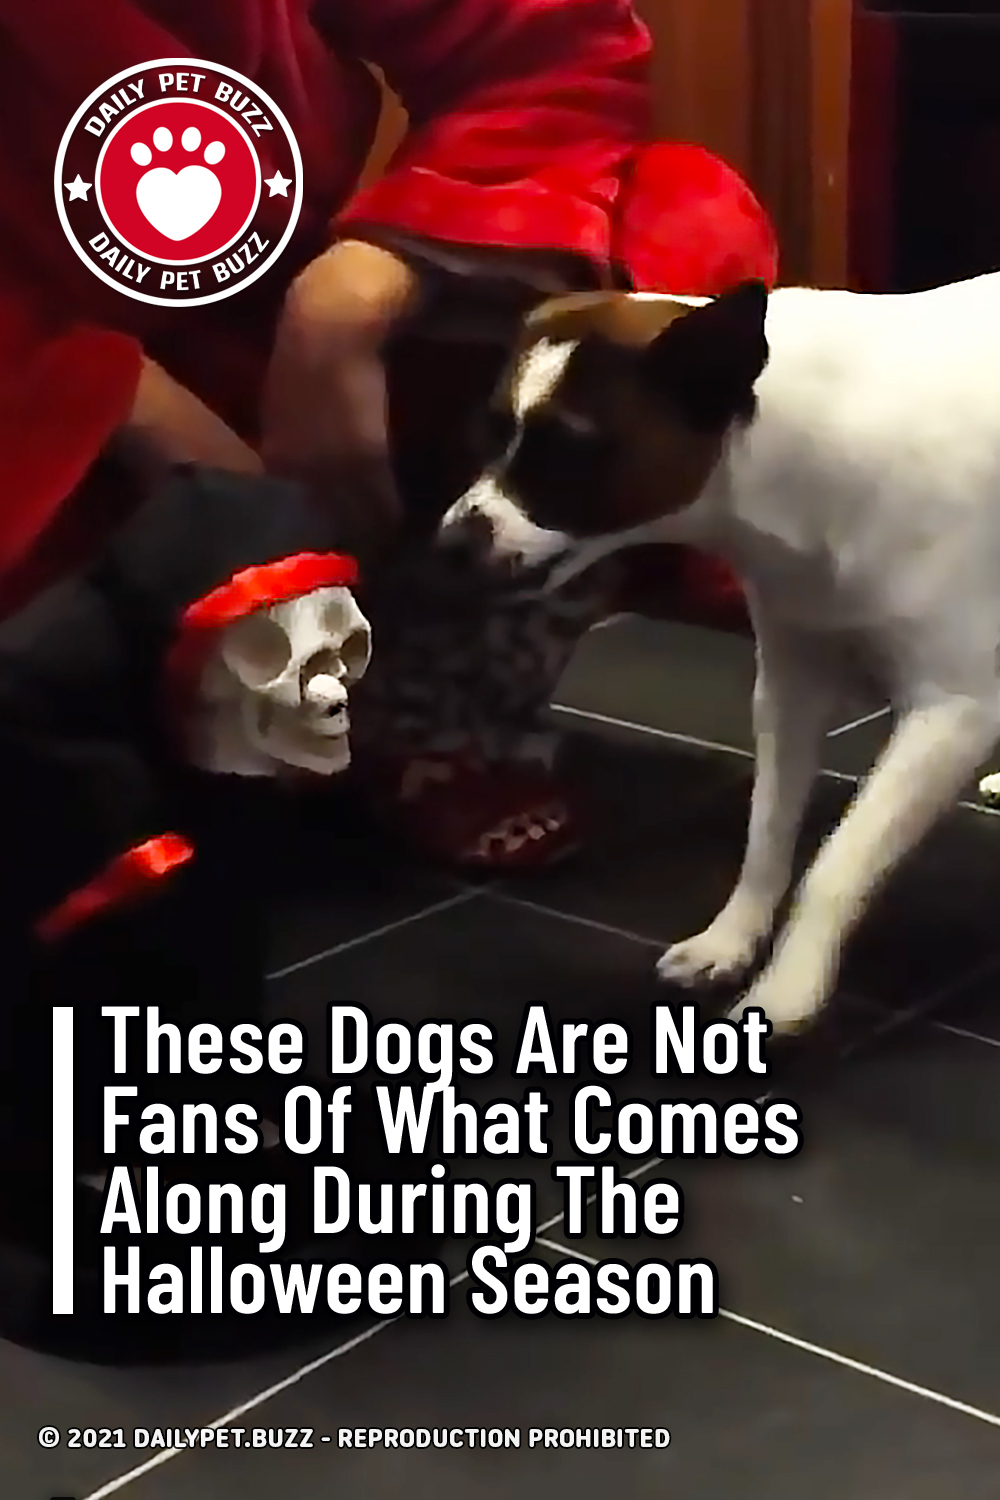 These Dogs Are Not Fans Of What Comes Along During The Halloween Season